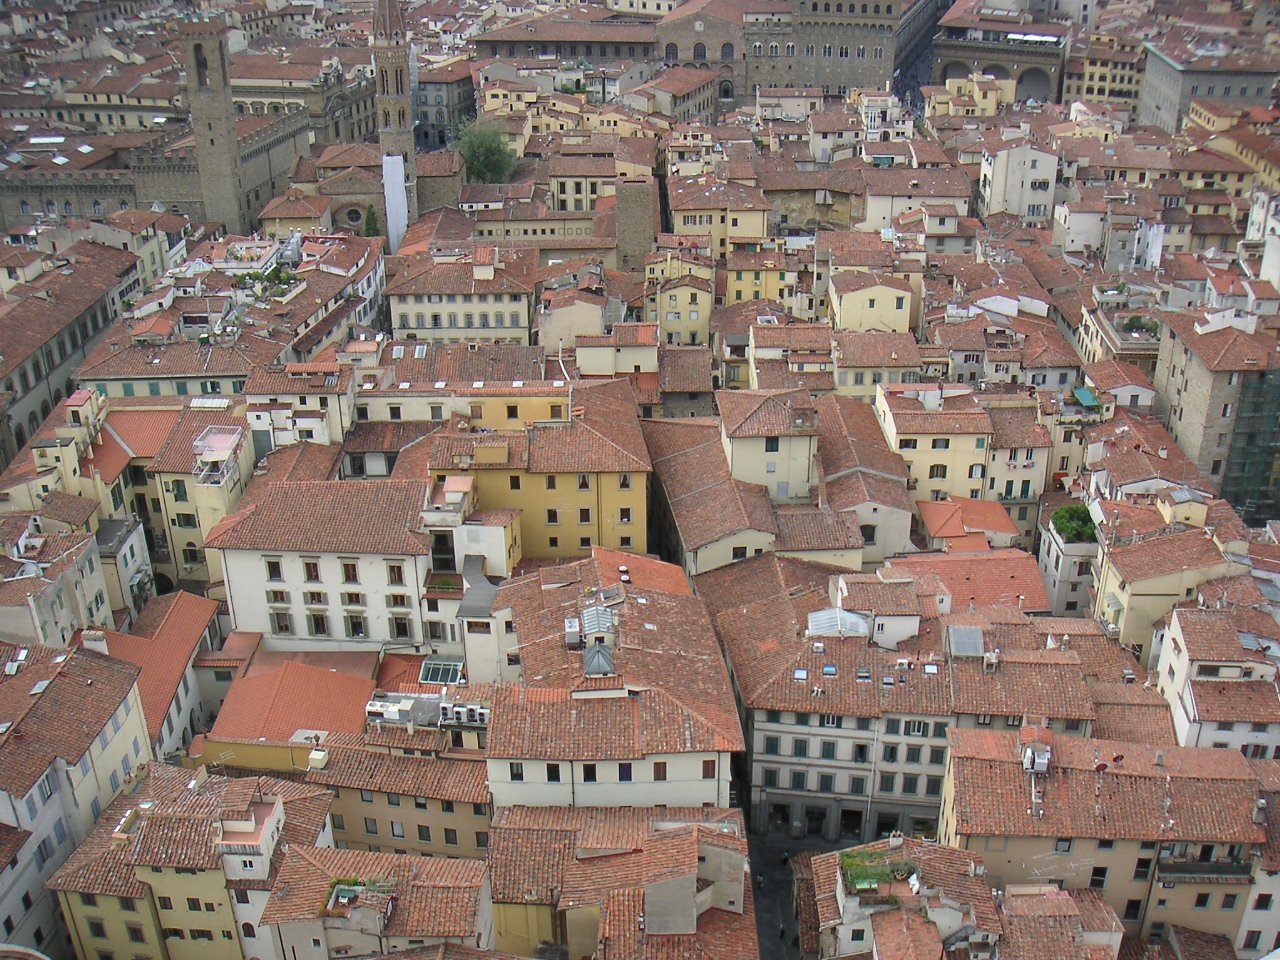 many different buildings with many red roofs